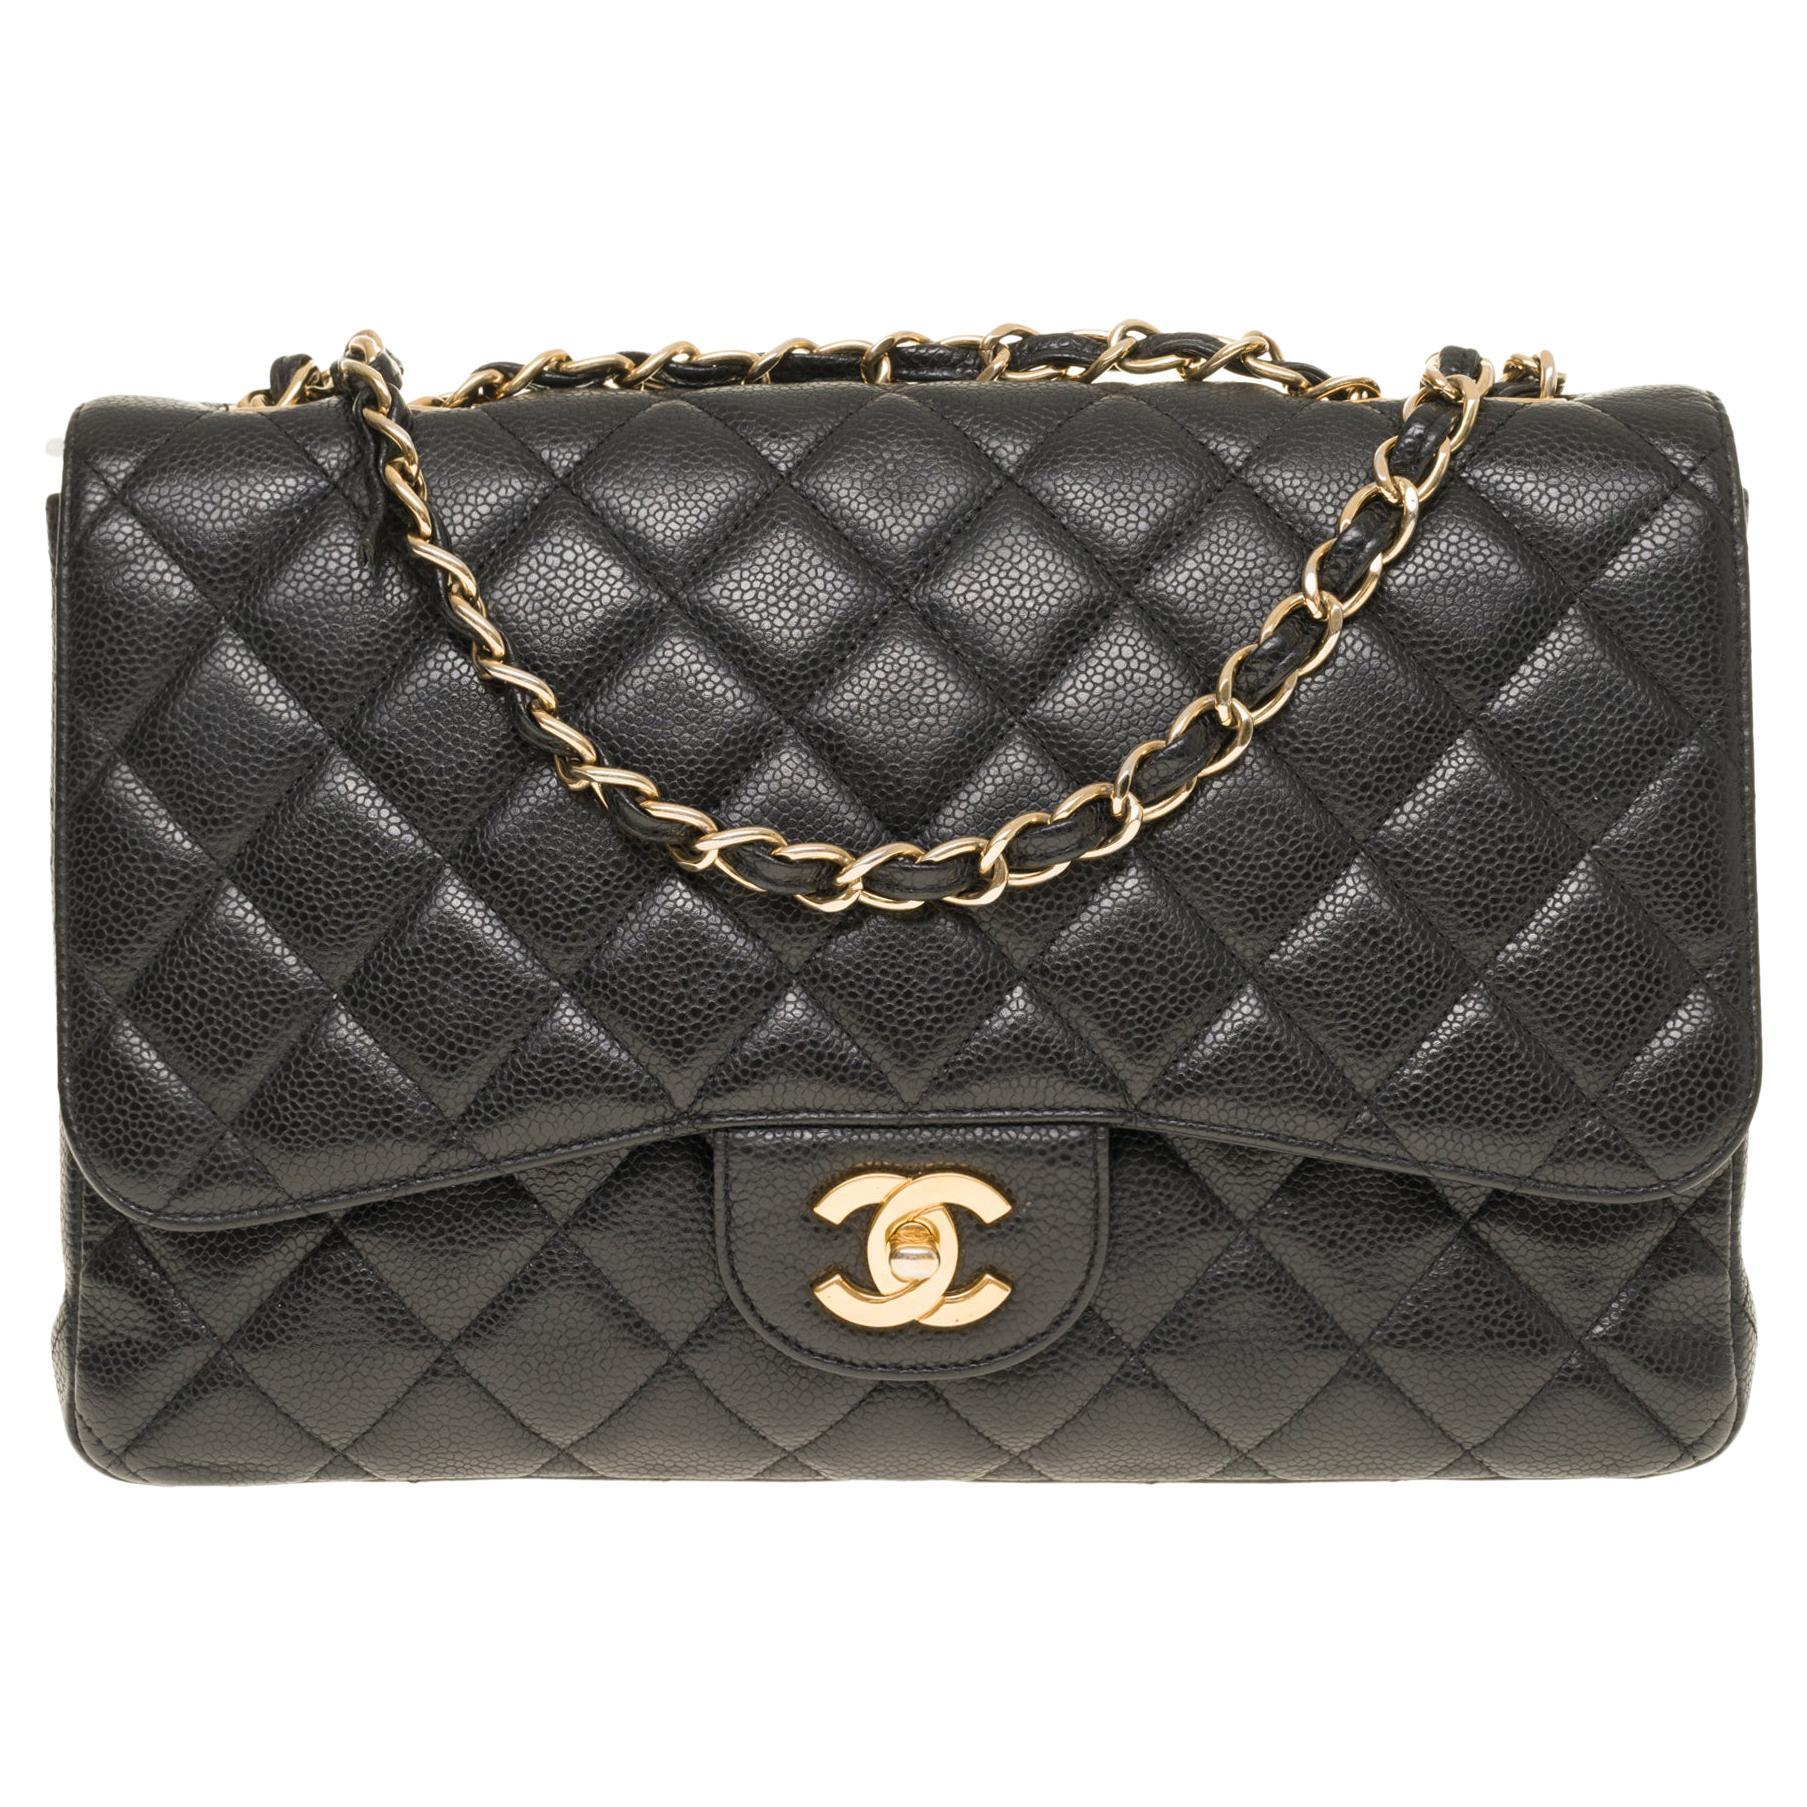 Chanel Timeless Jumbo shoulder bag in black quilted caviar leather, GHW